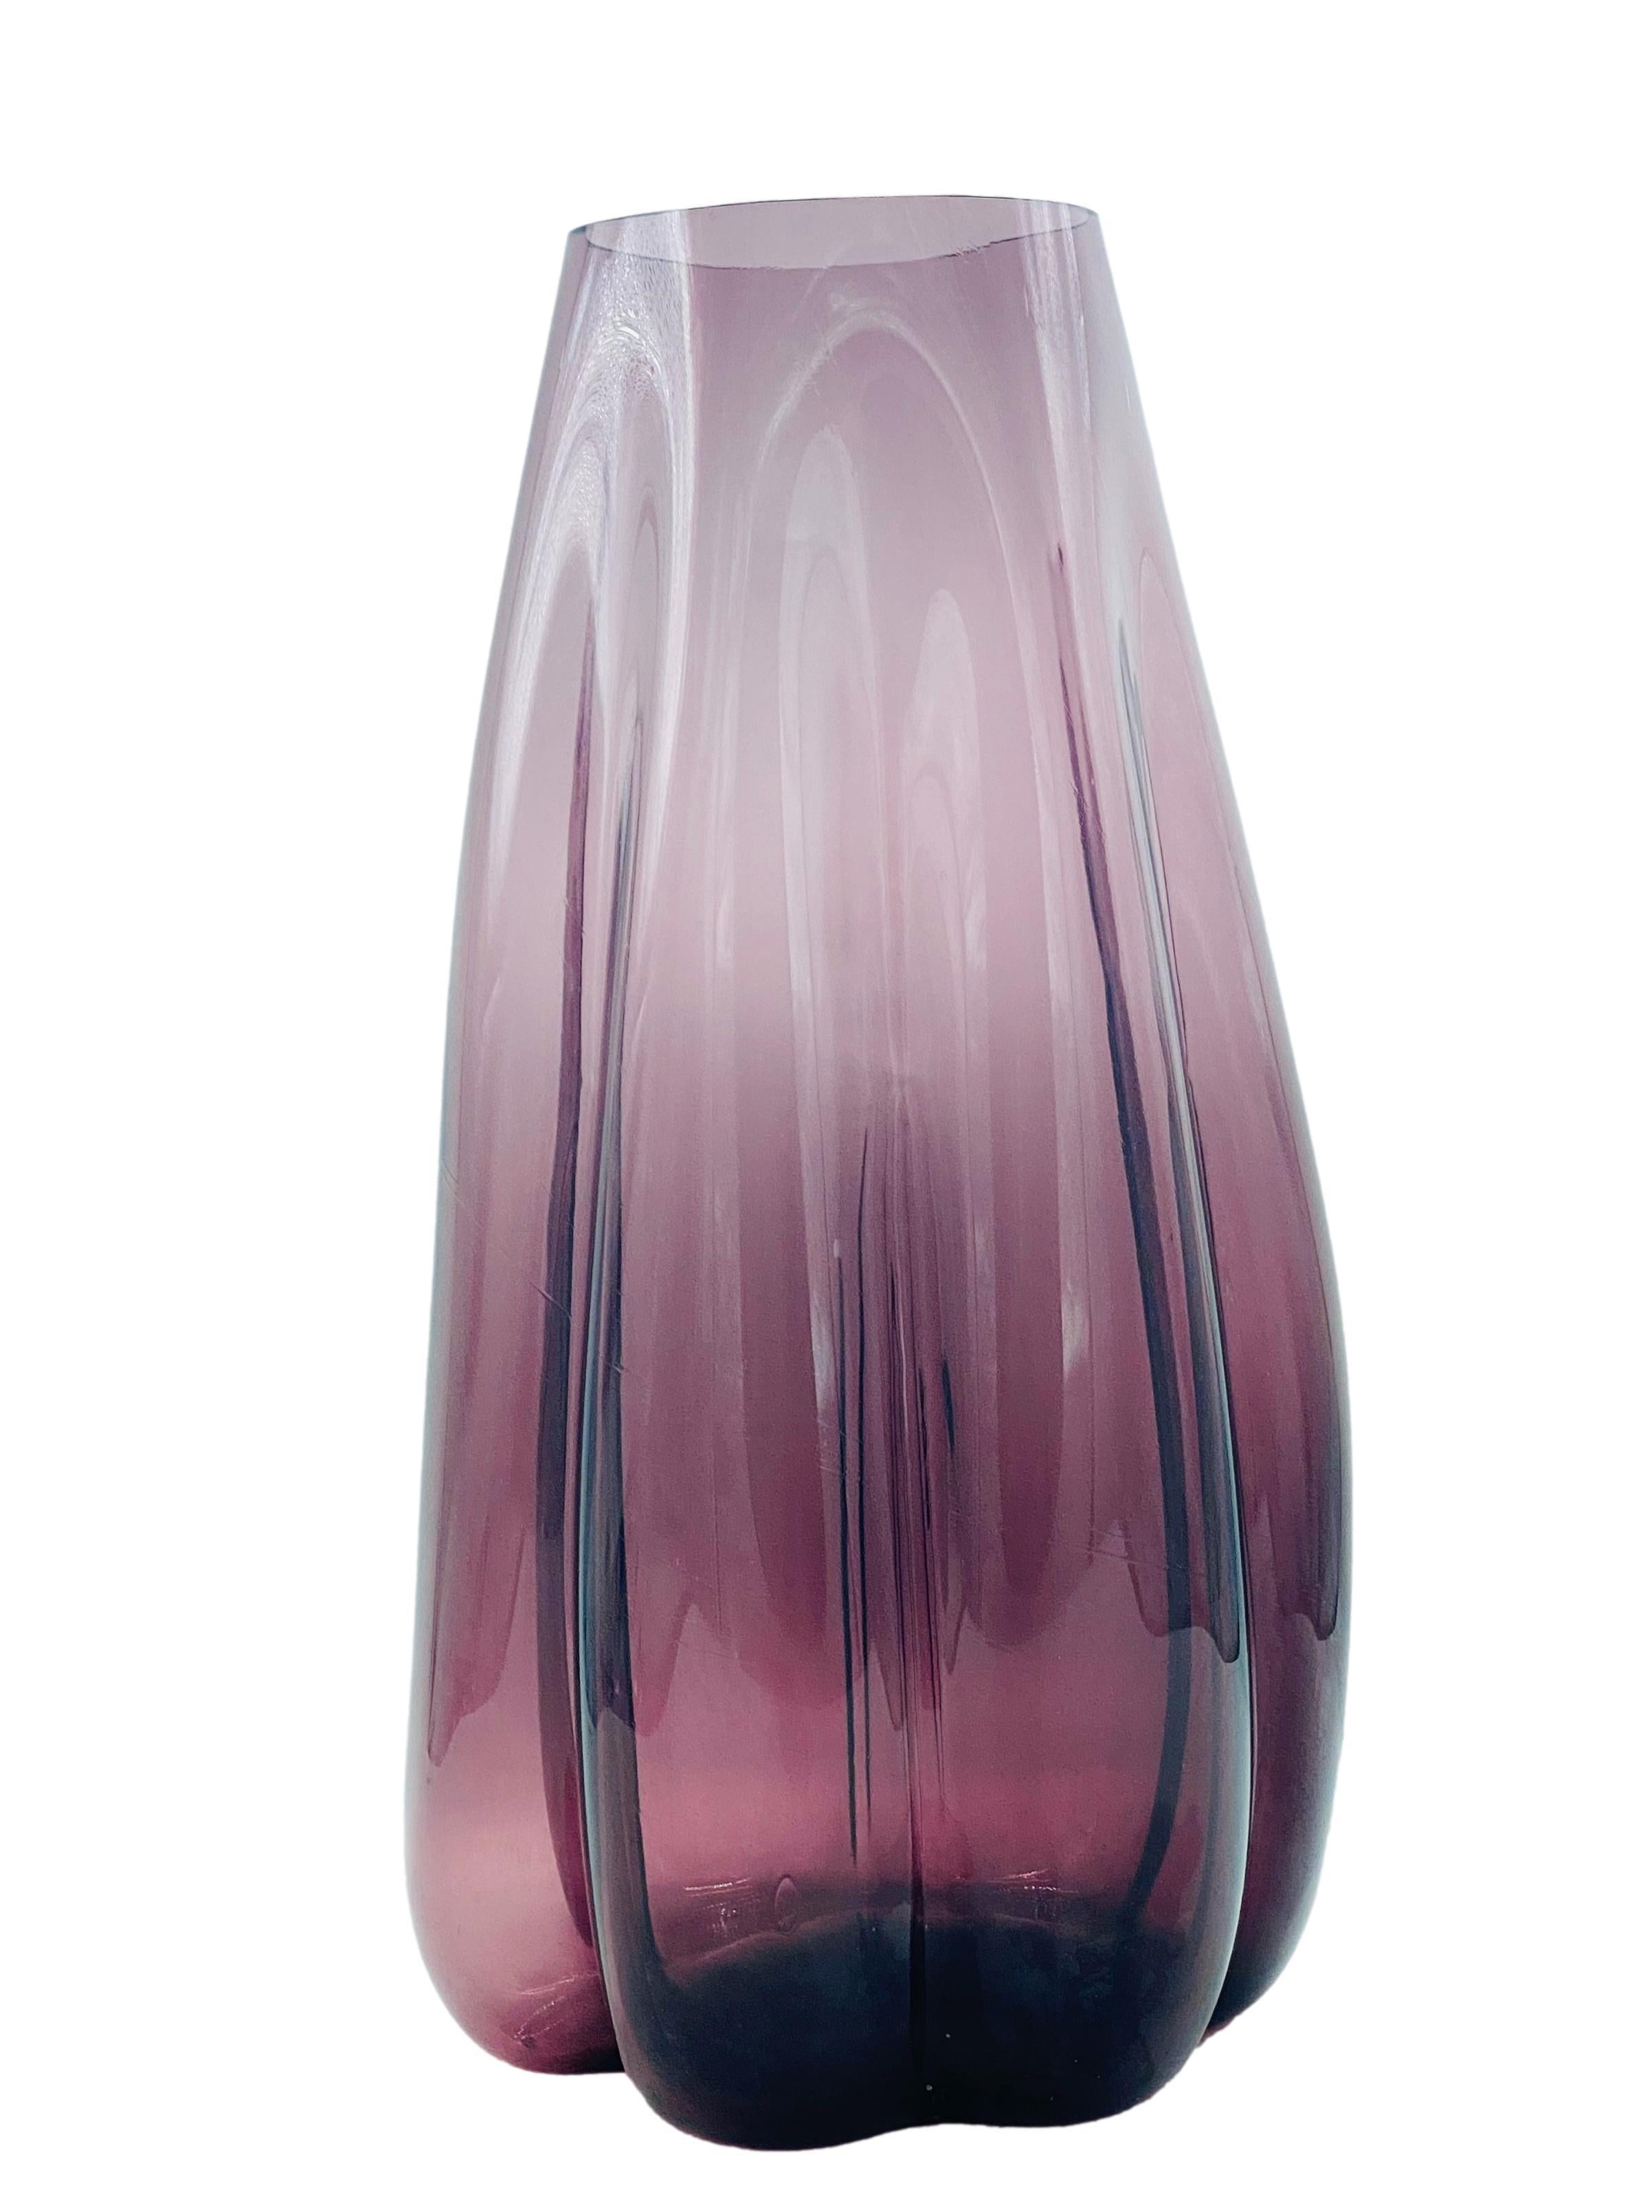 Large blown Murano glass vase in Venetian purple, the rounded shape is given by the glass using a blown technique, Italy 1970. In the style of Alessandro Mendini.